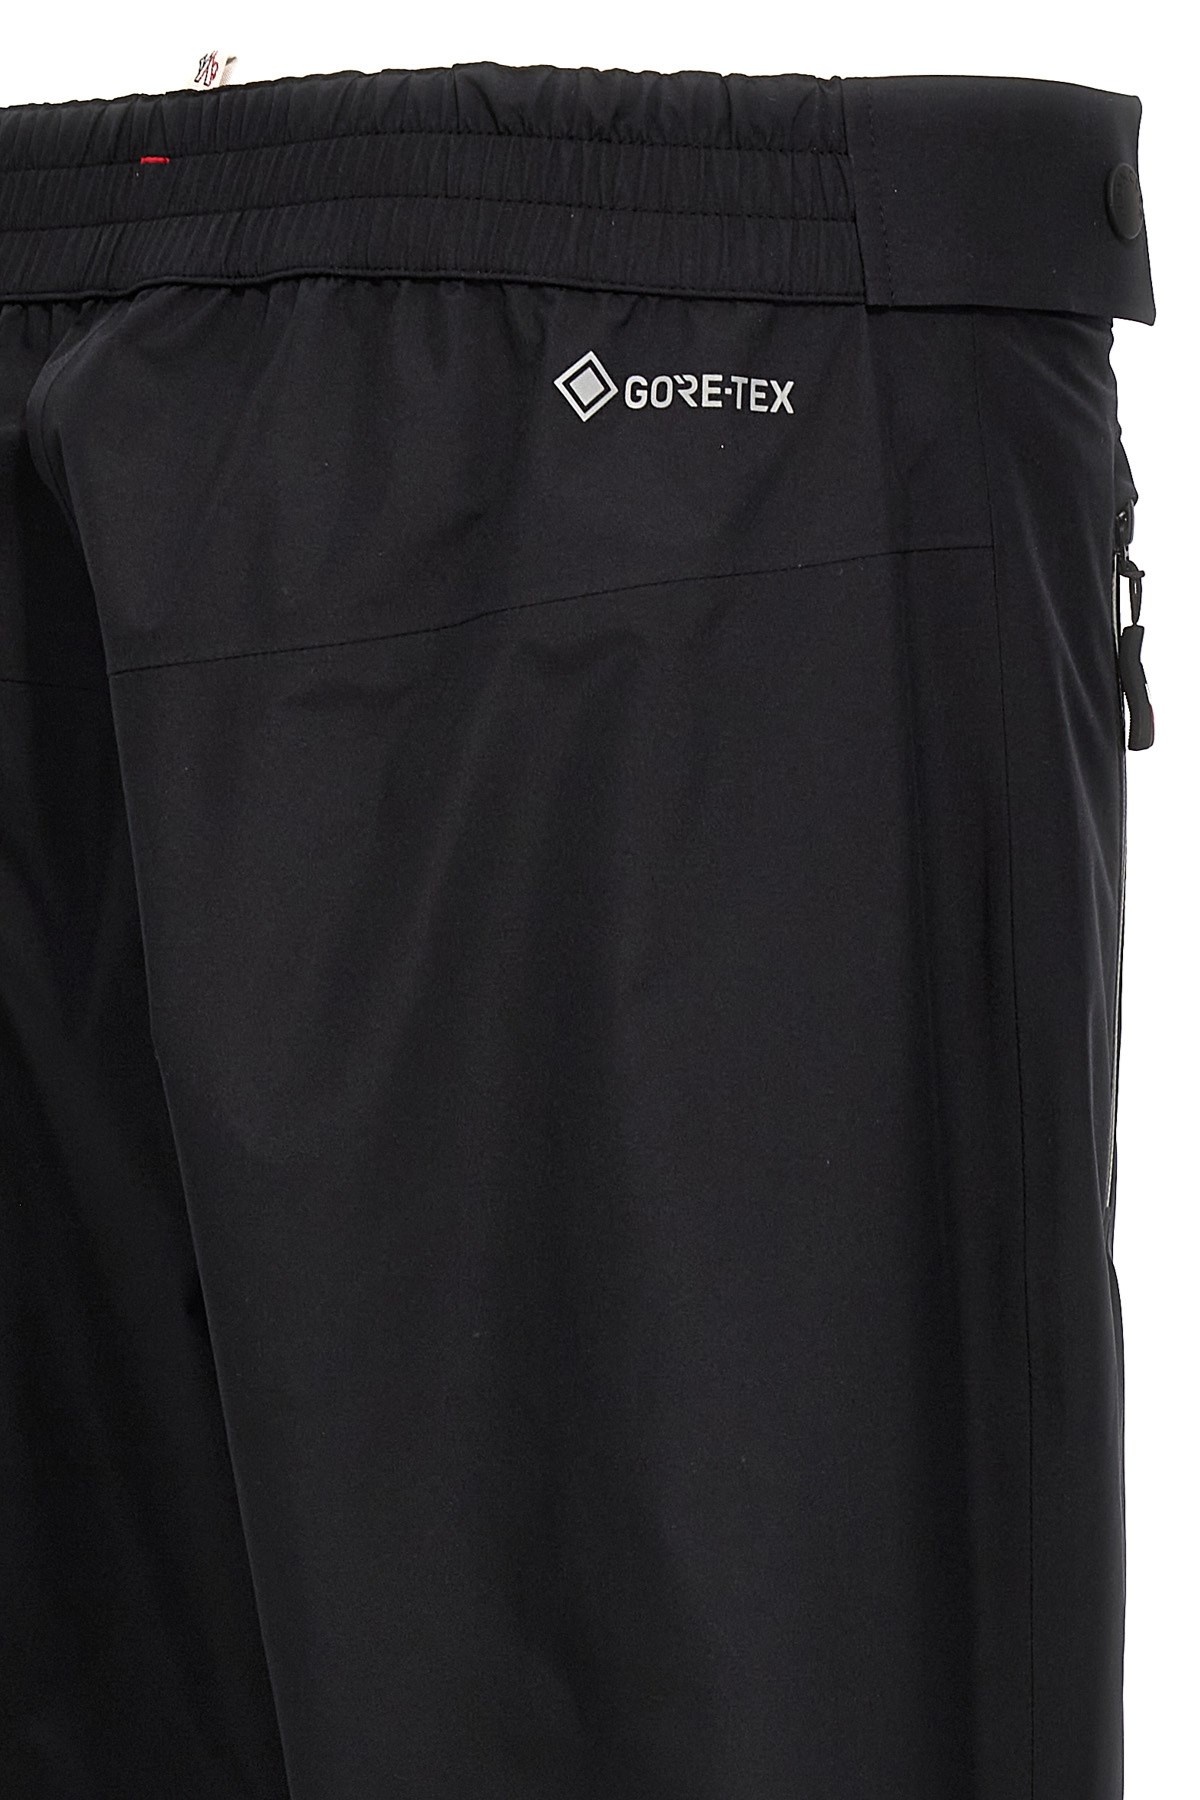 GORE-TEX trousers - 4